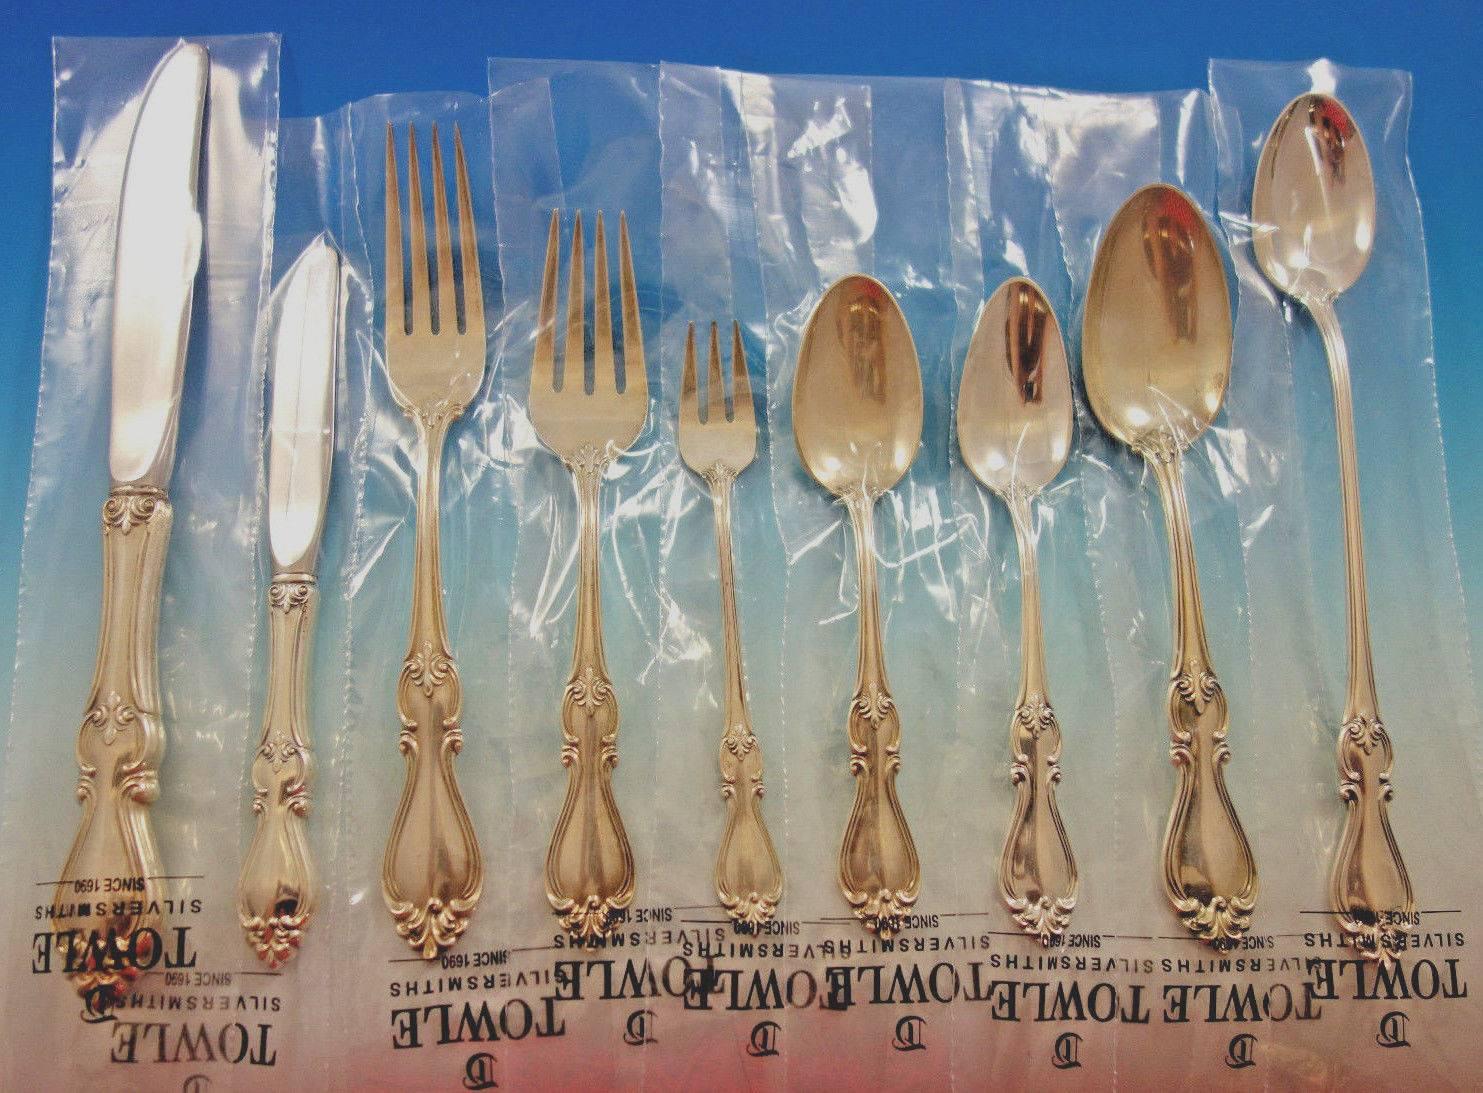 New, unused queen Elizabeth I by Towle sterling silver flatware set, 78 pieces. This set includes: 

eight place knives, 9